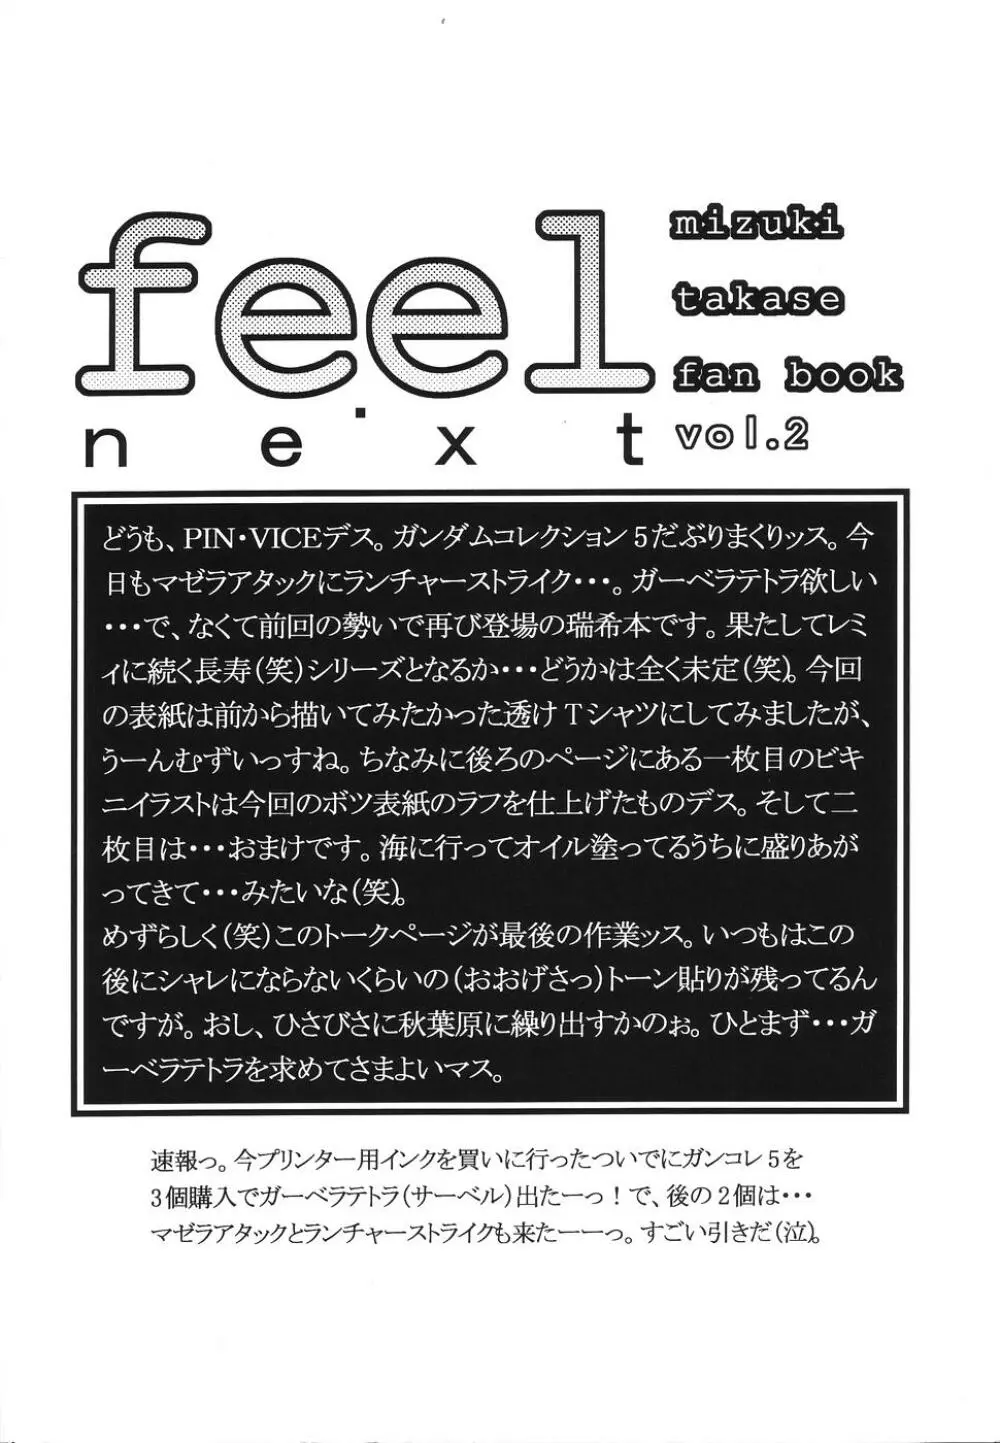 feel・next - page3